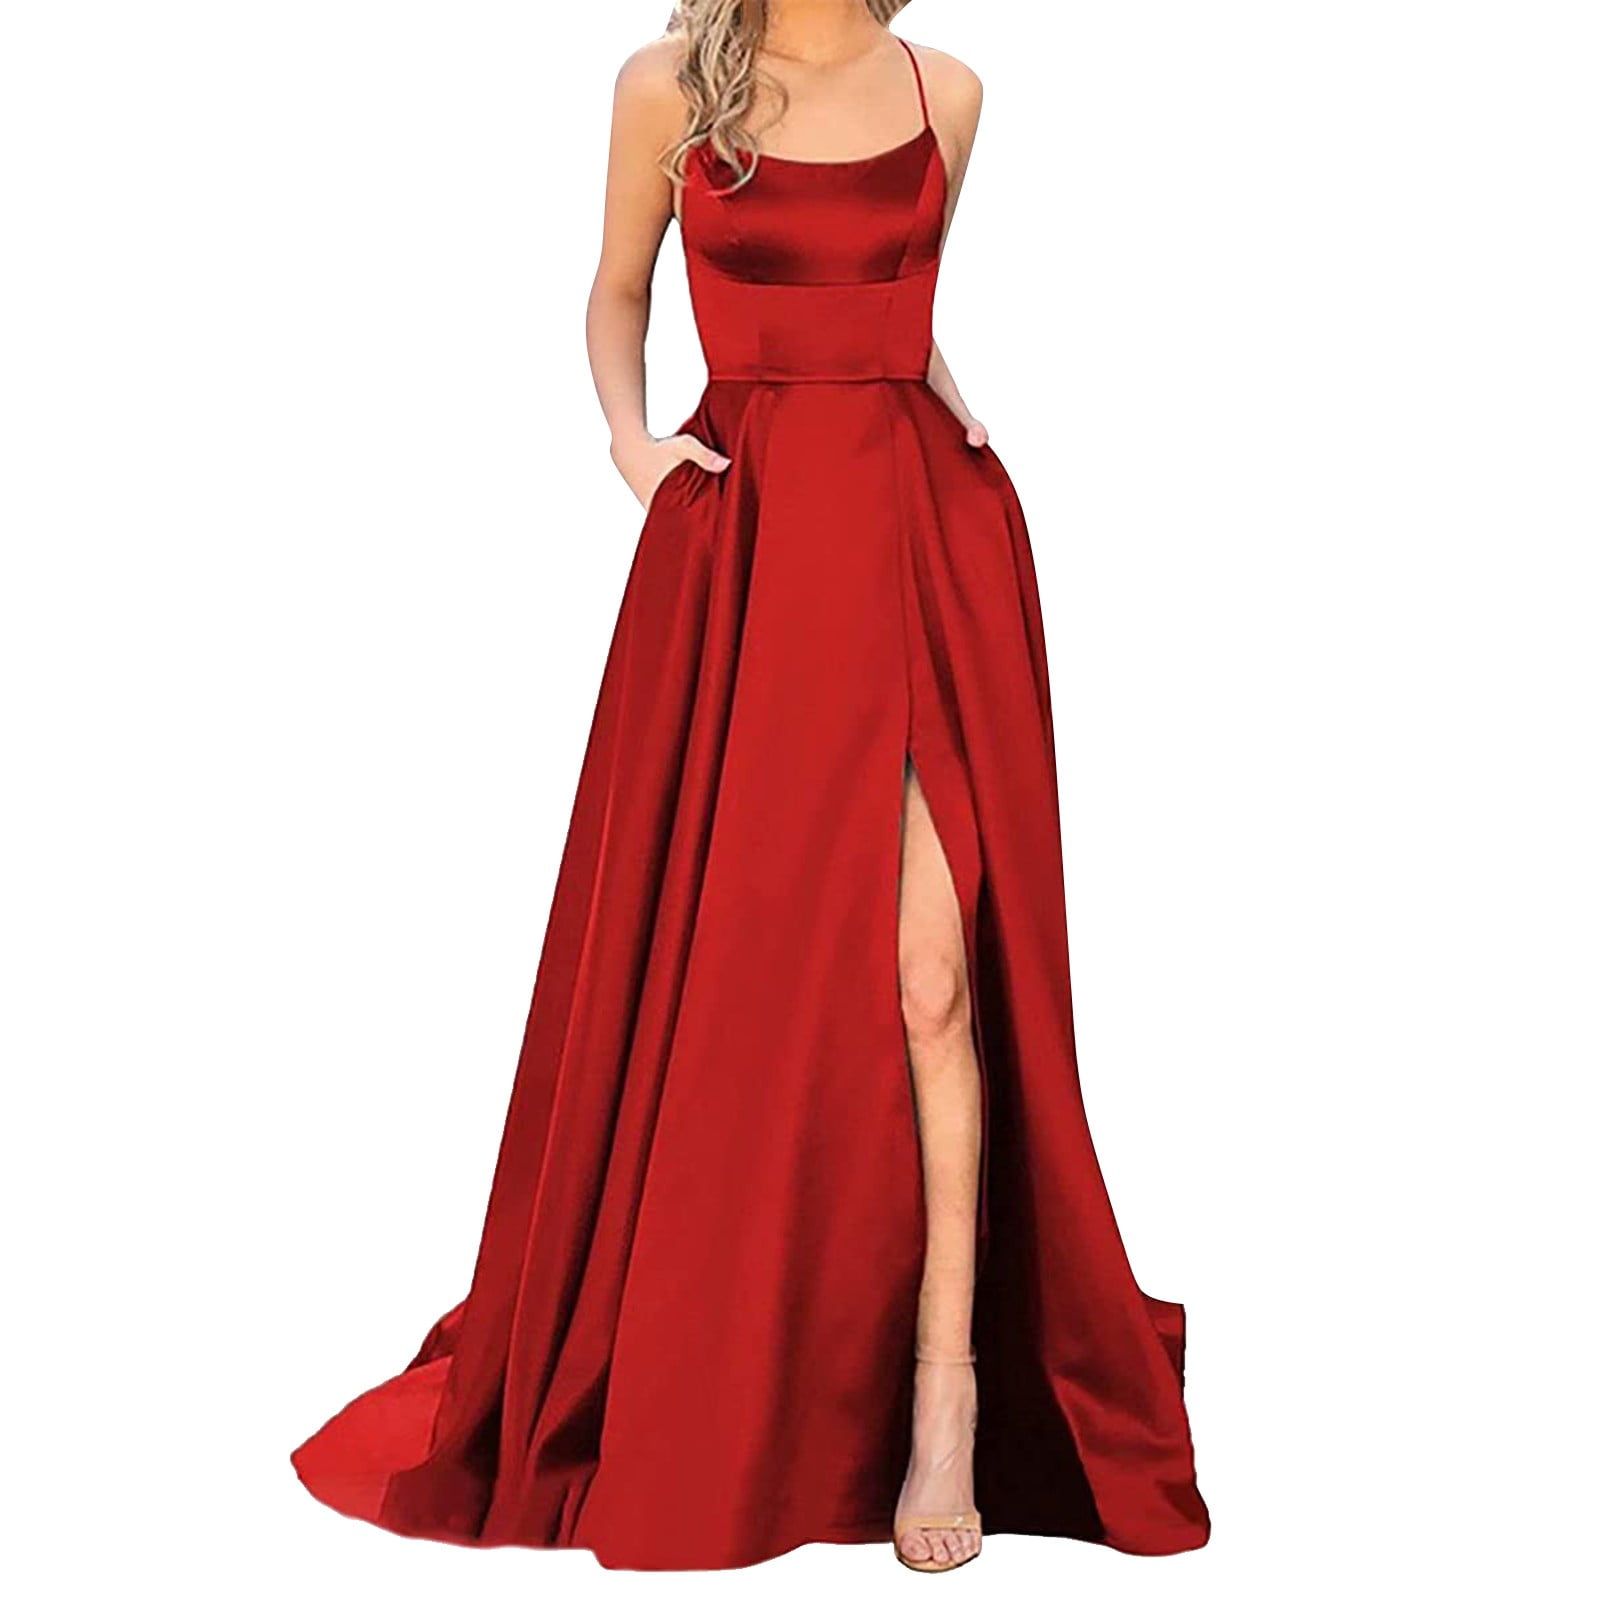 Women's Red Evening Dresses, Red Occasion Dresses